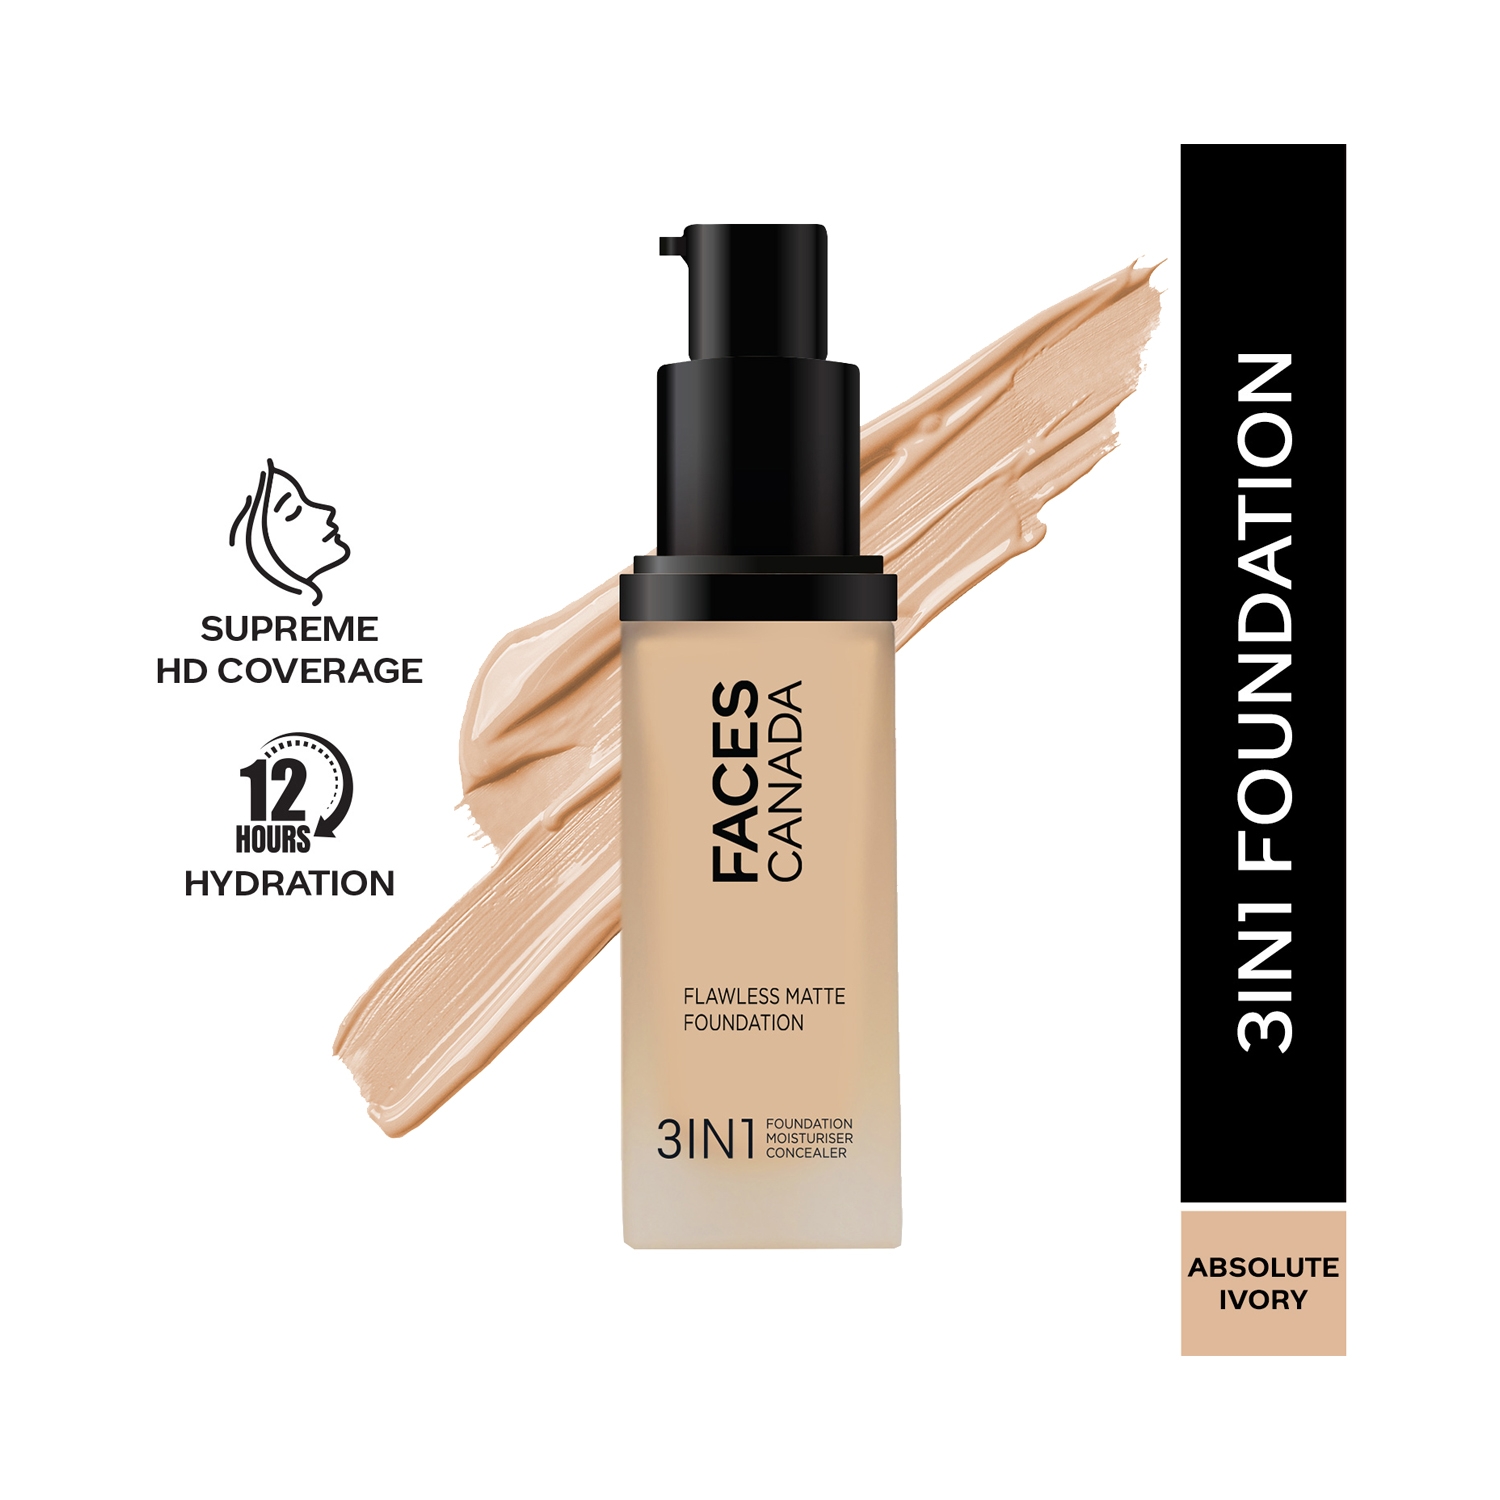 Faces Canada | Faces Canada 3-In-1 Flawless Matte Foundation SPF 18 - 012 Absolute Ivory (30ml)